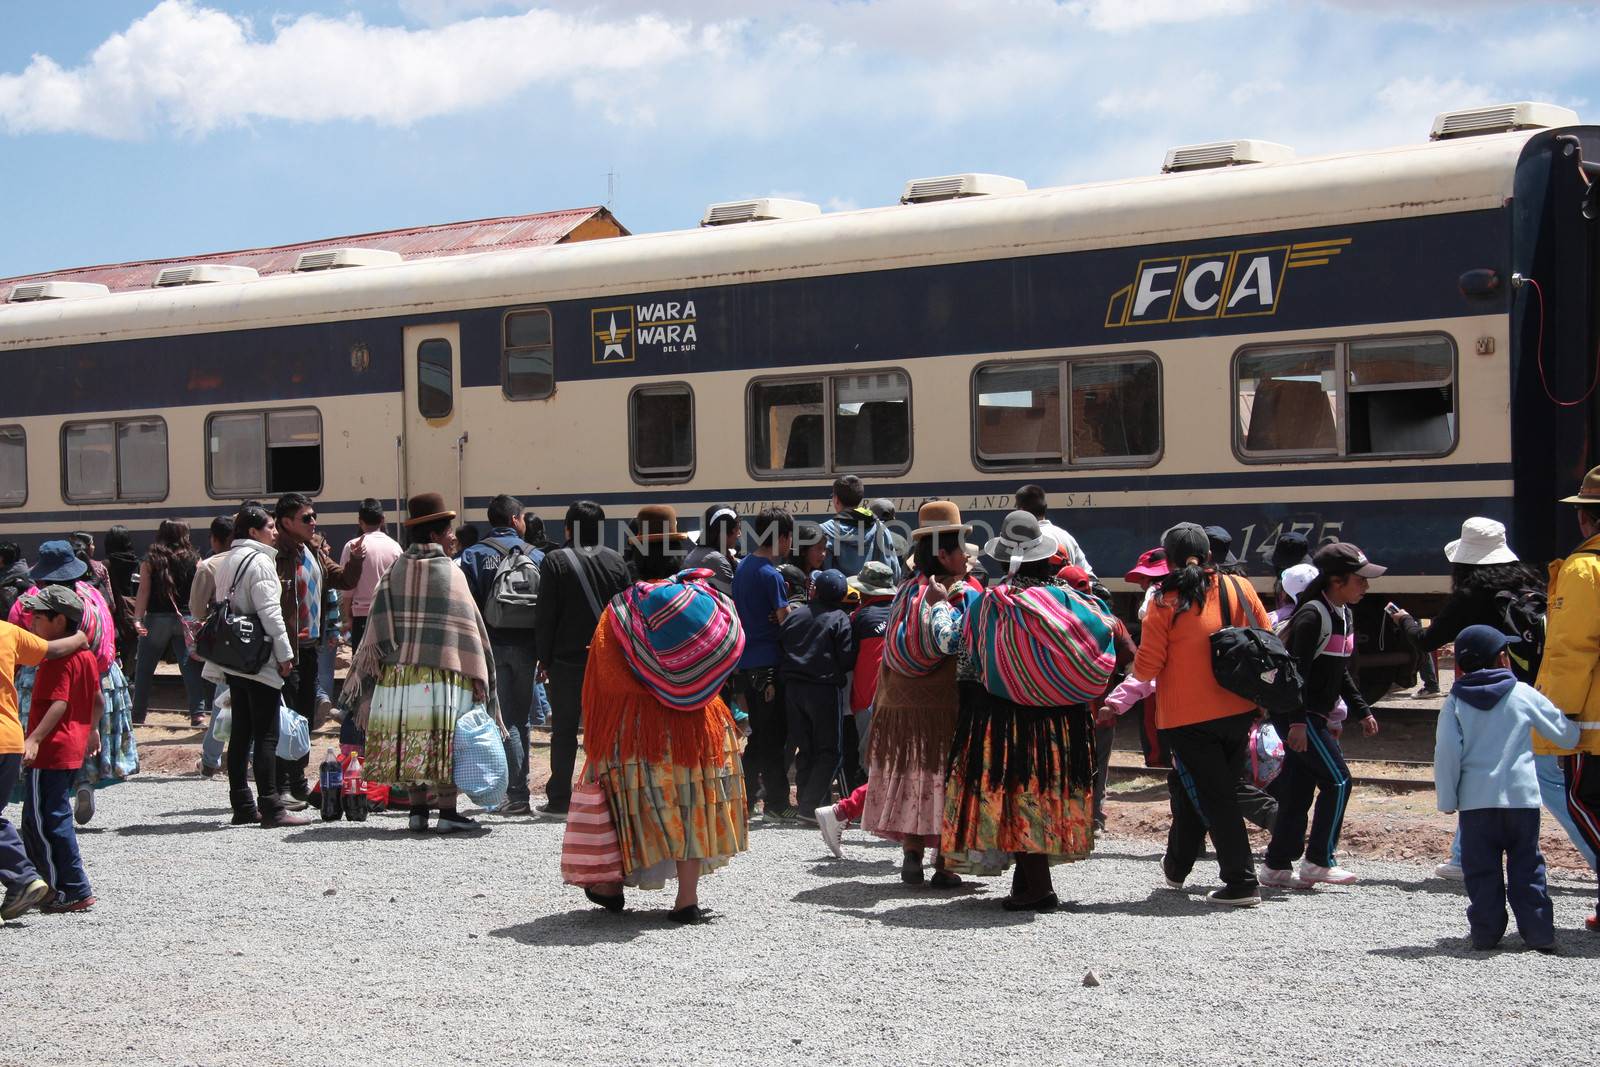 Indian women at the train station in Bolivia by jjspring